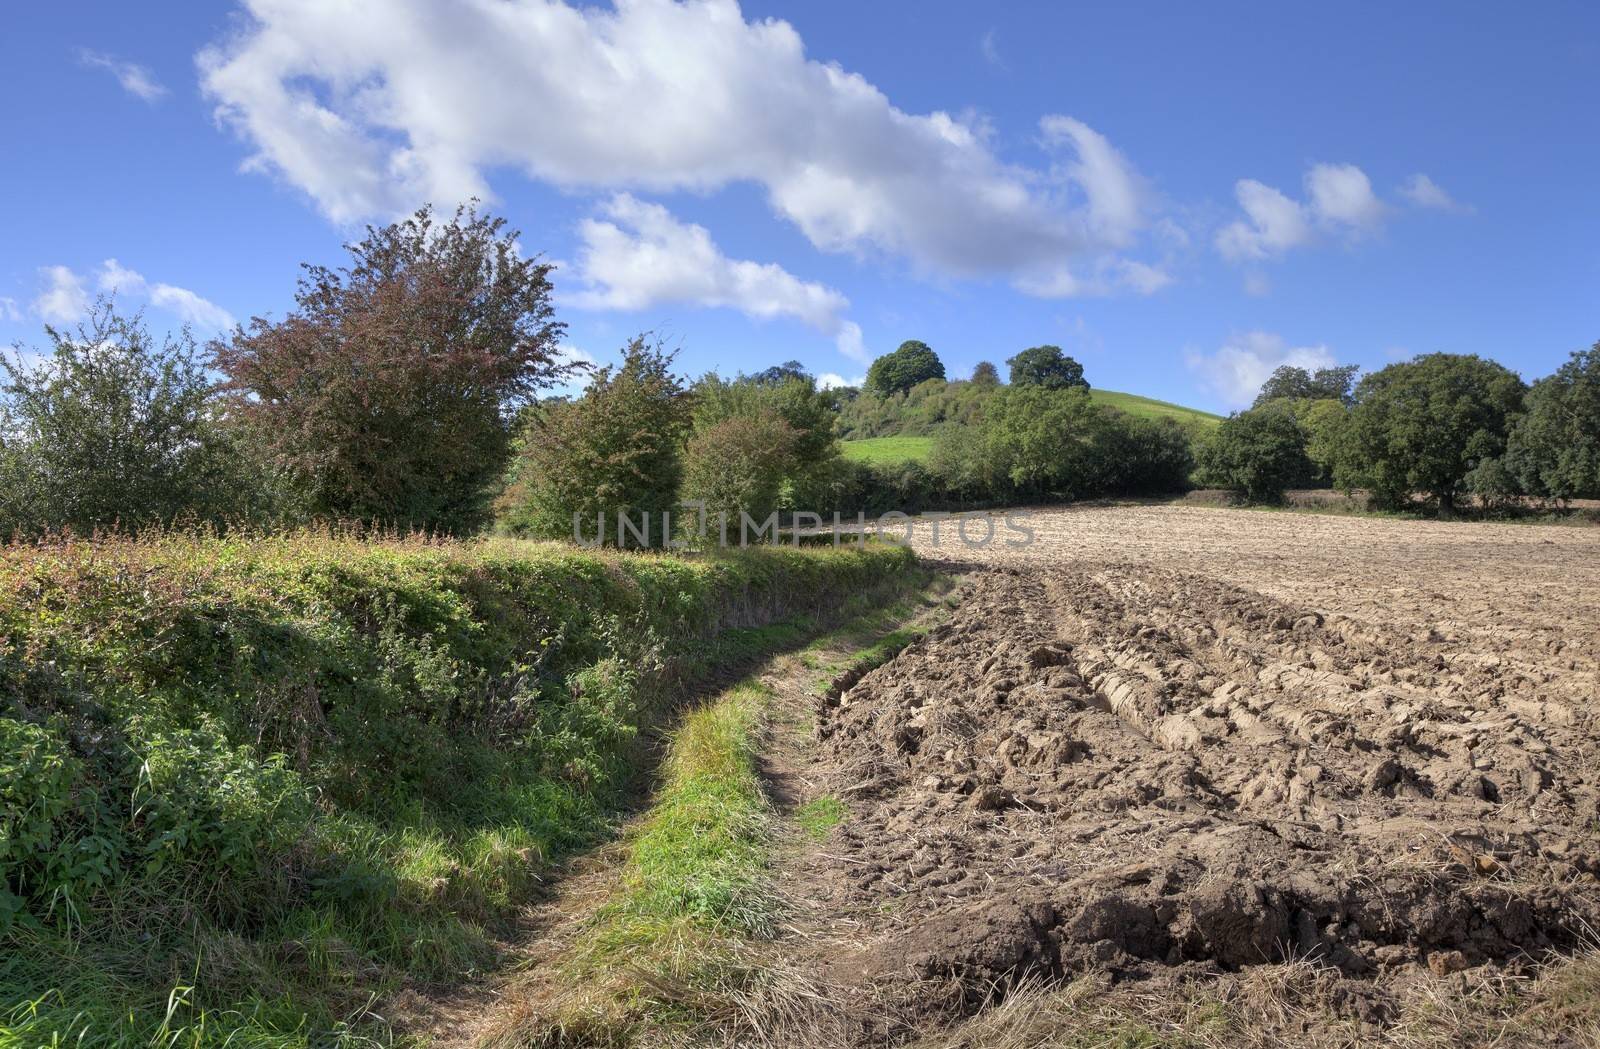 Rural England showing ploughed field, hedgerows and hills in late Summer.